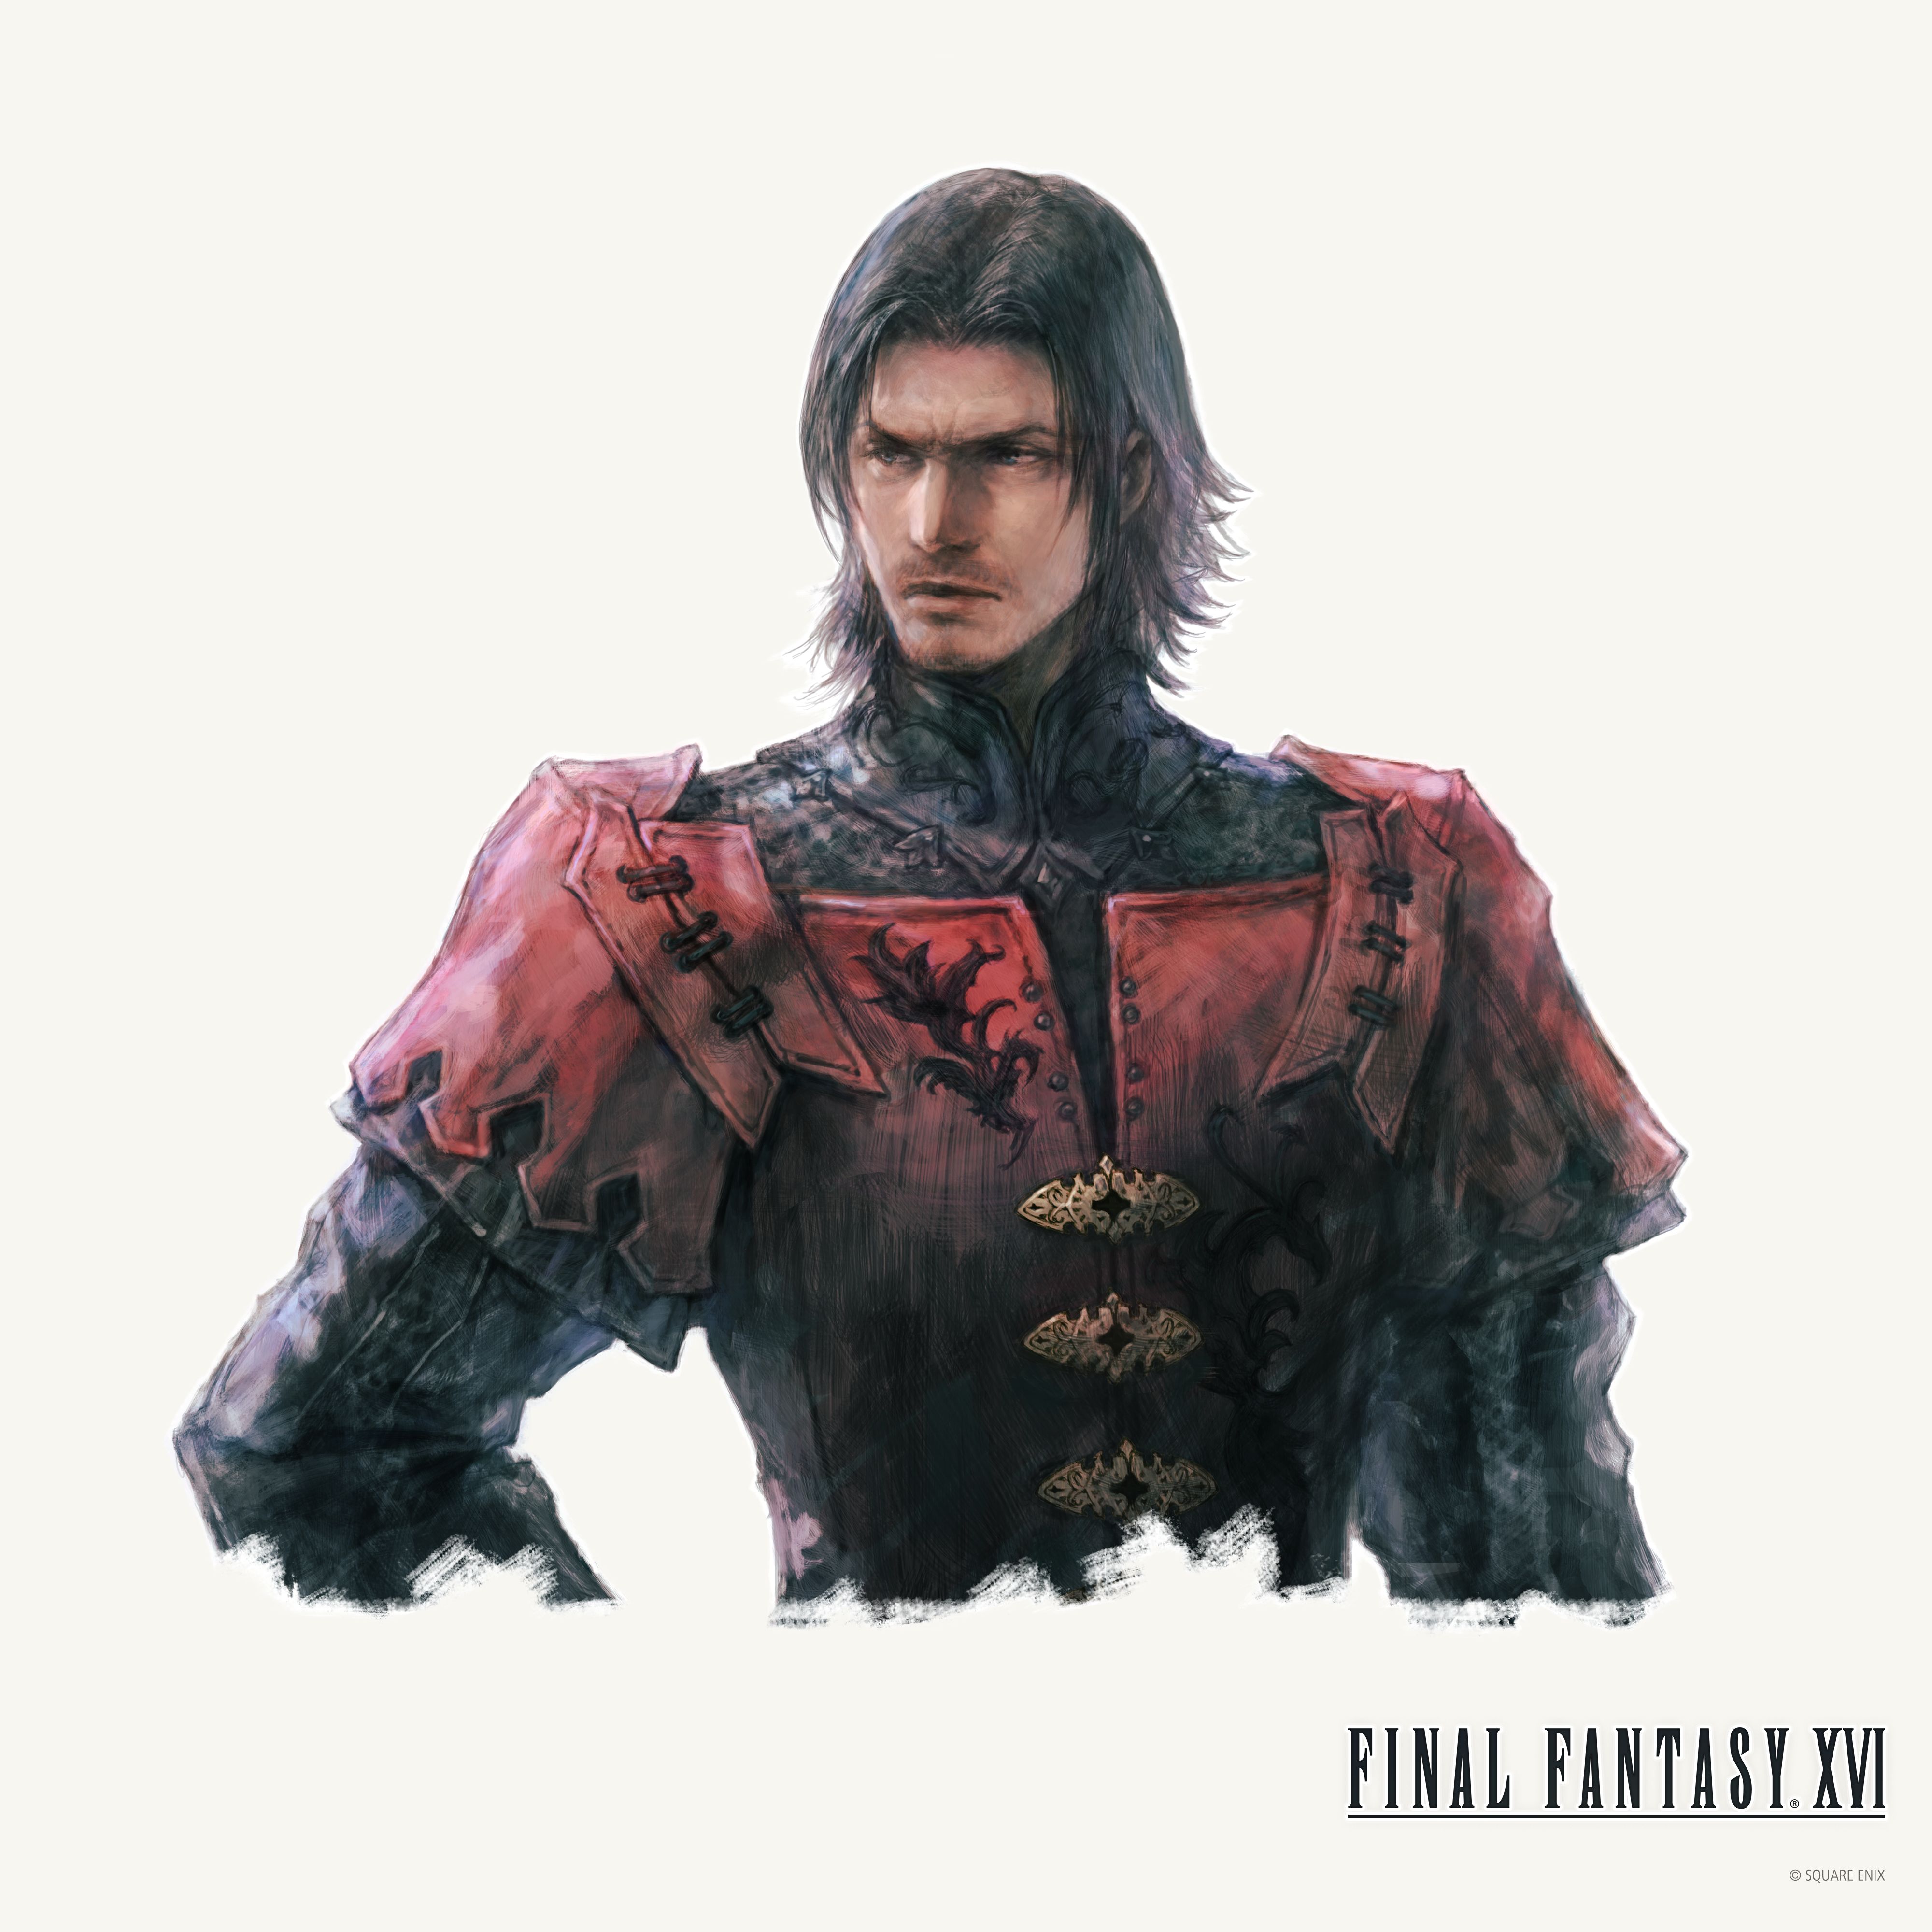 What Parents Need to Know About Final Fantasy XVI